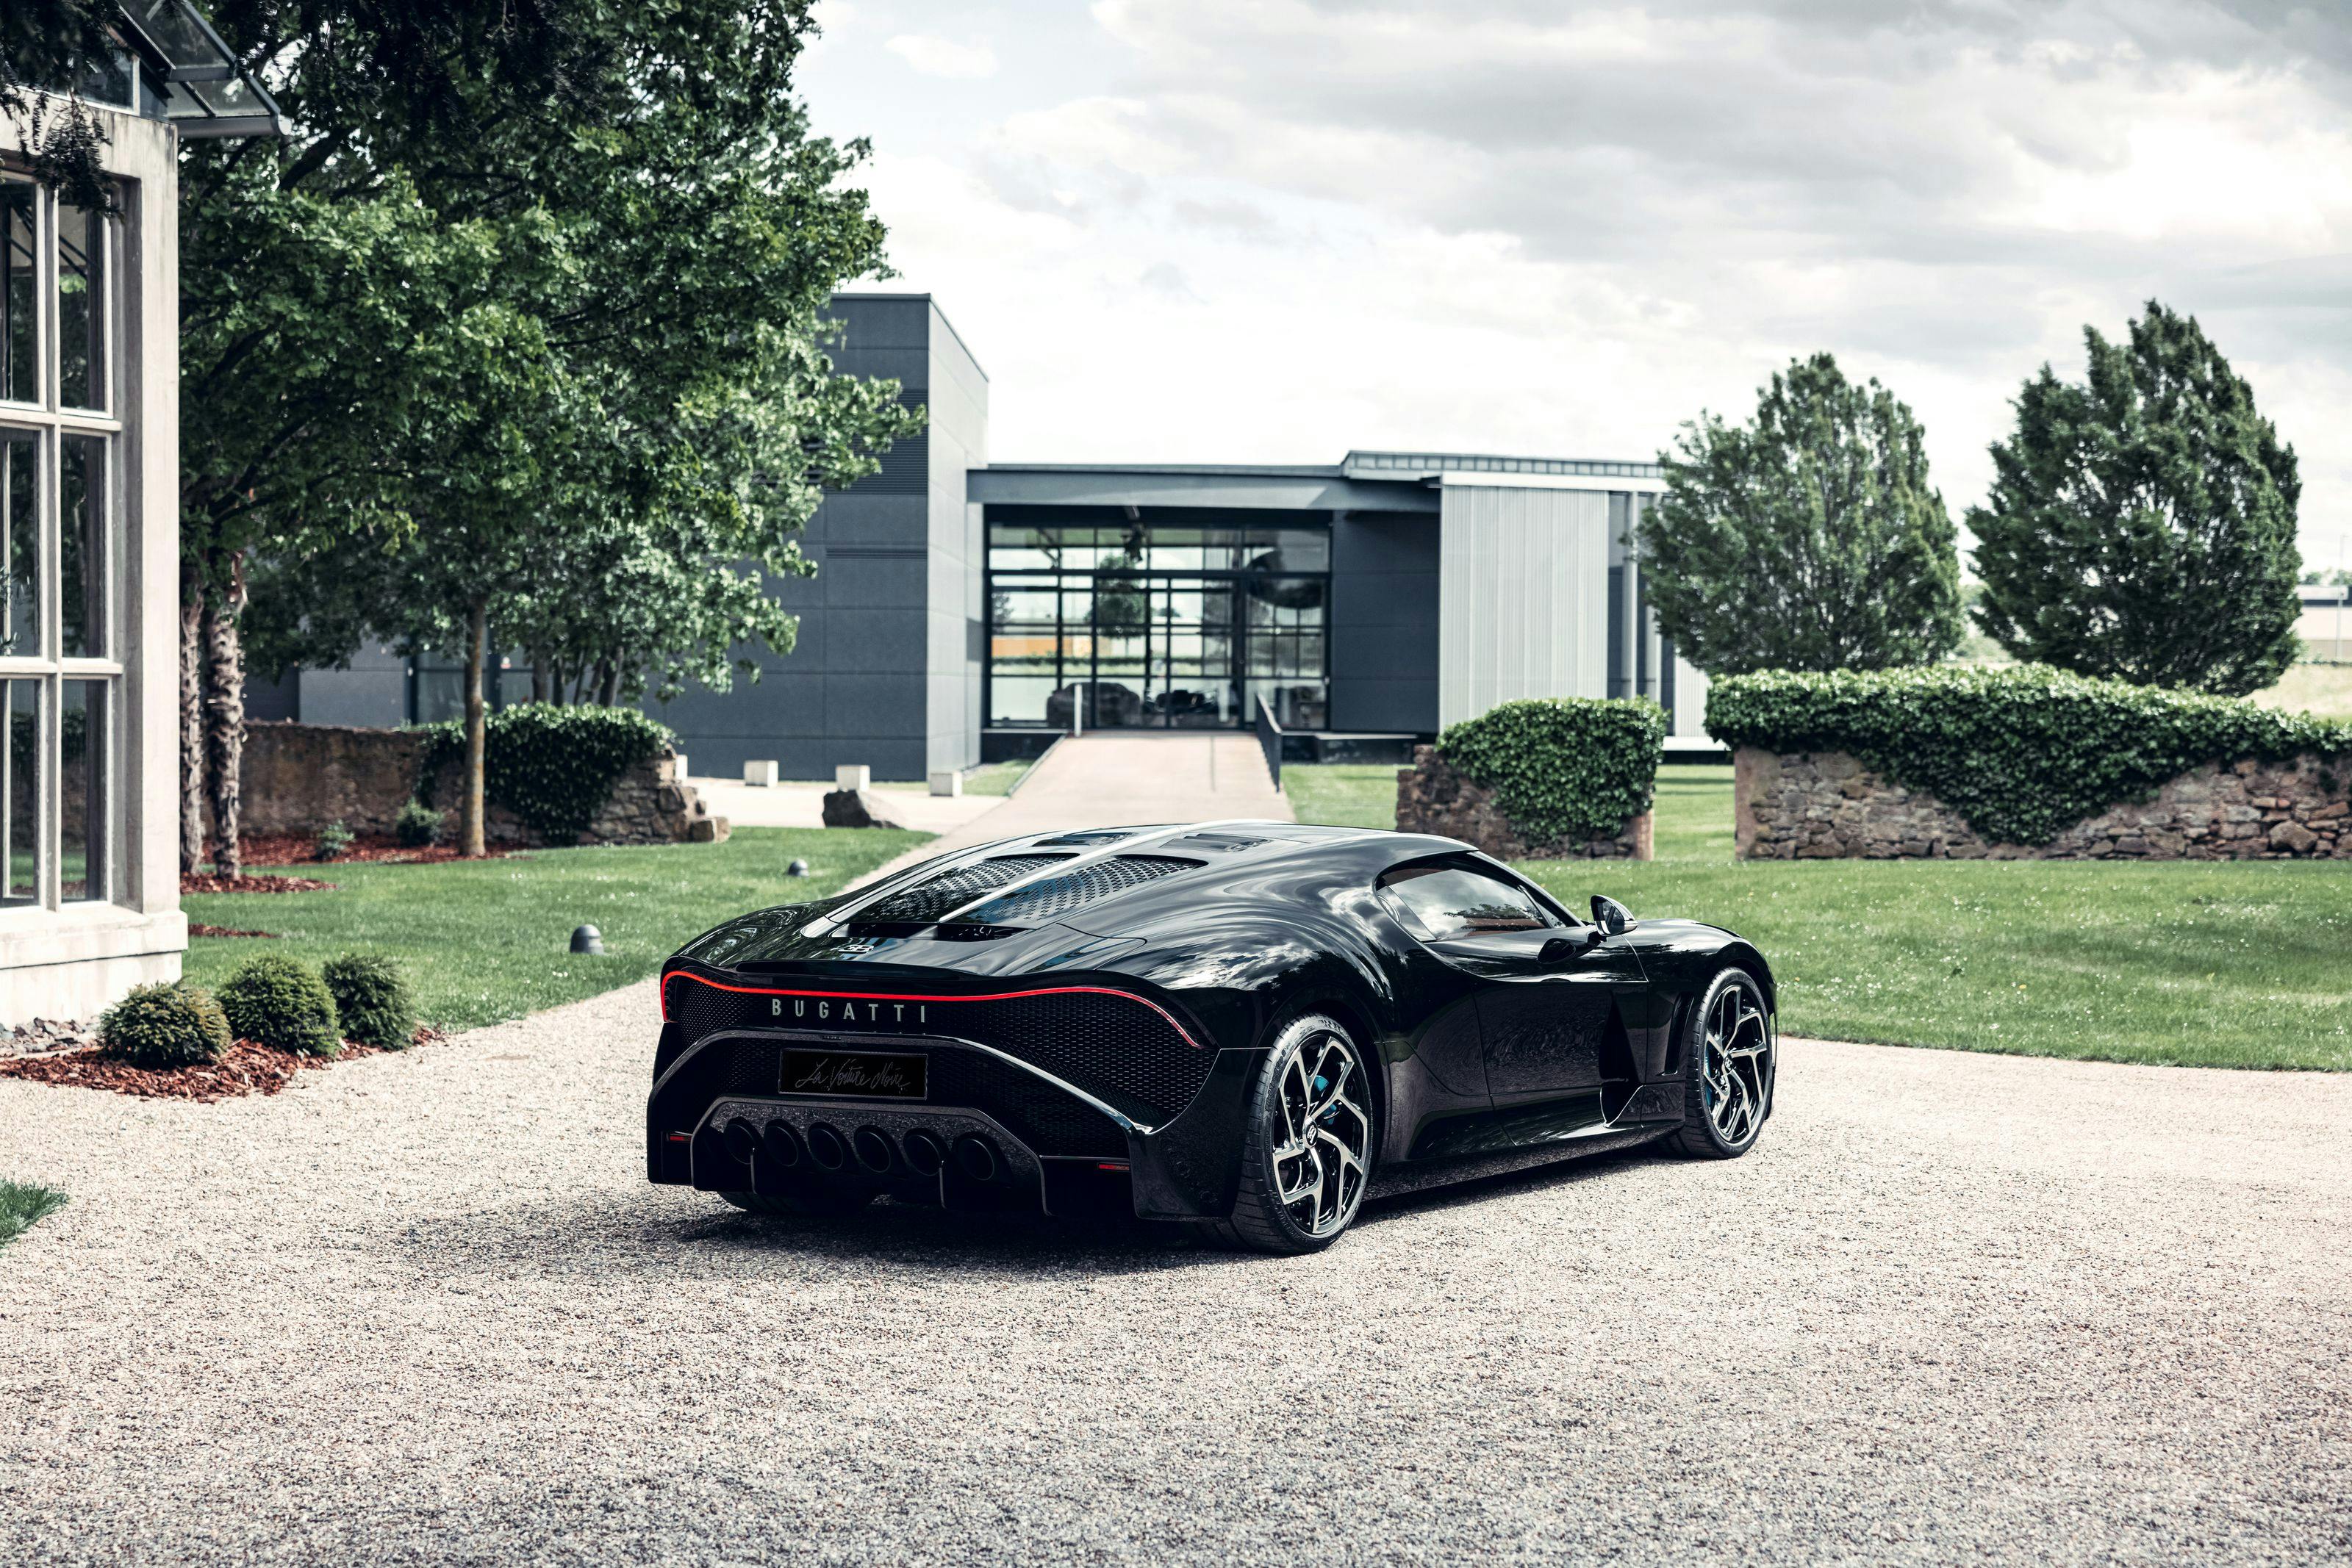 Bugatti’s La Voiture Noire – From a Vision to a Reality